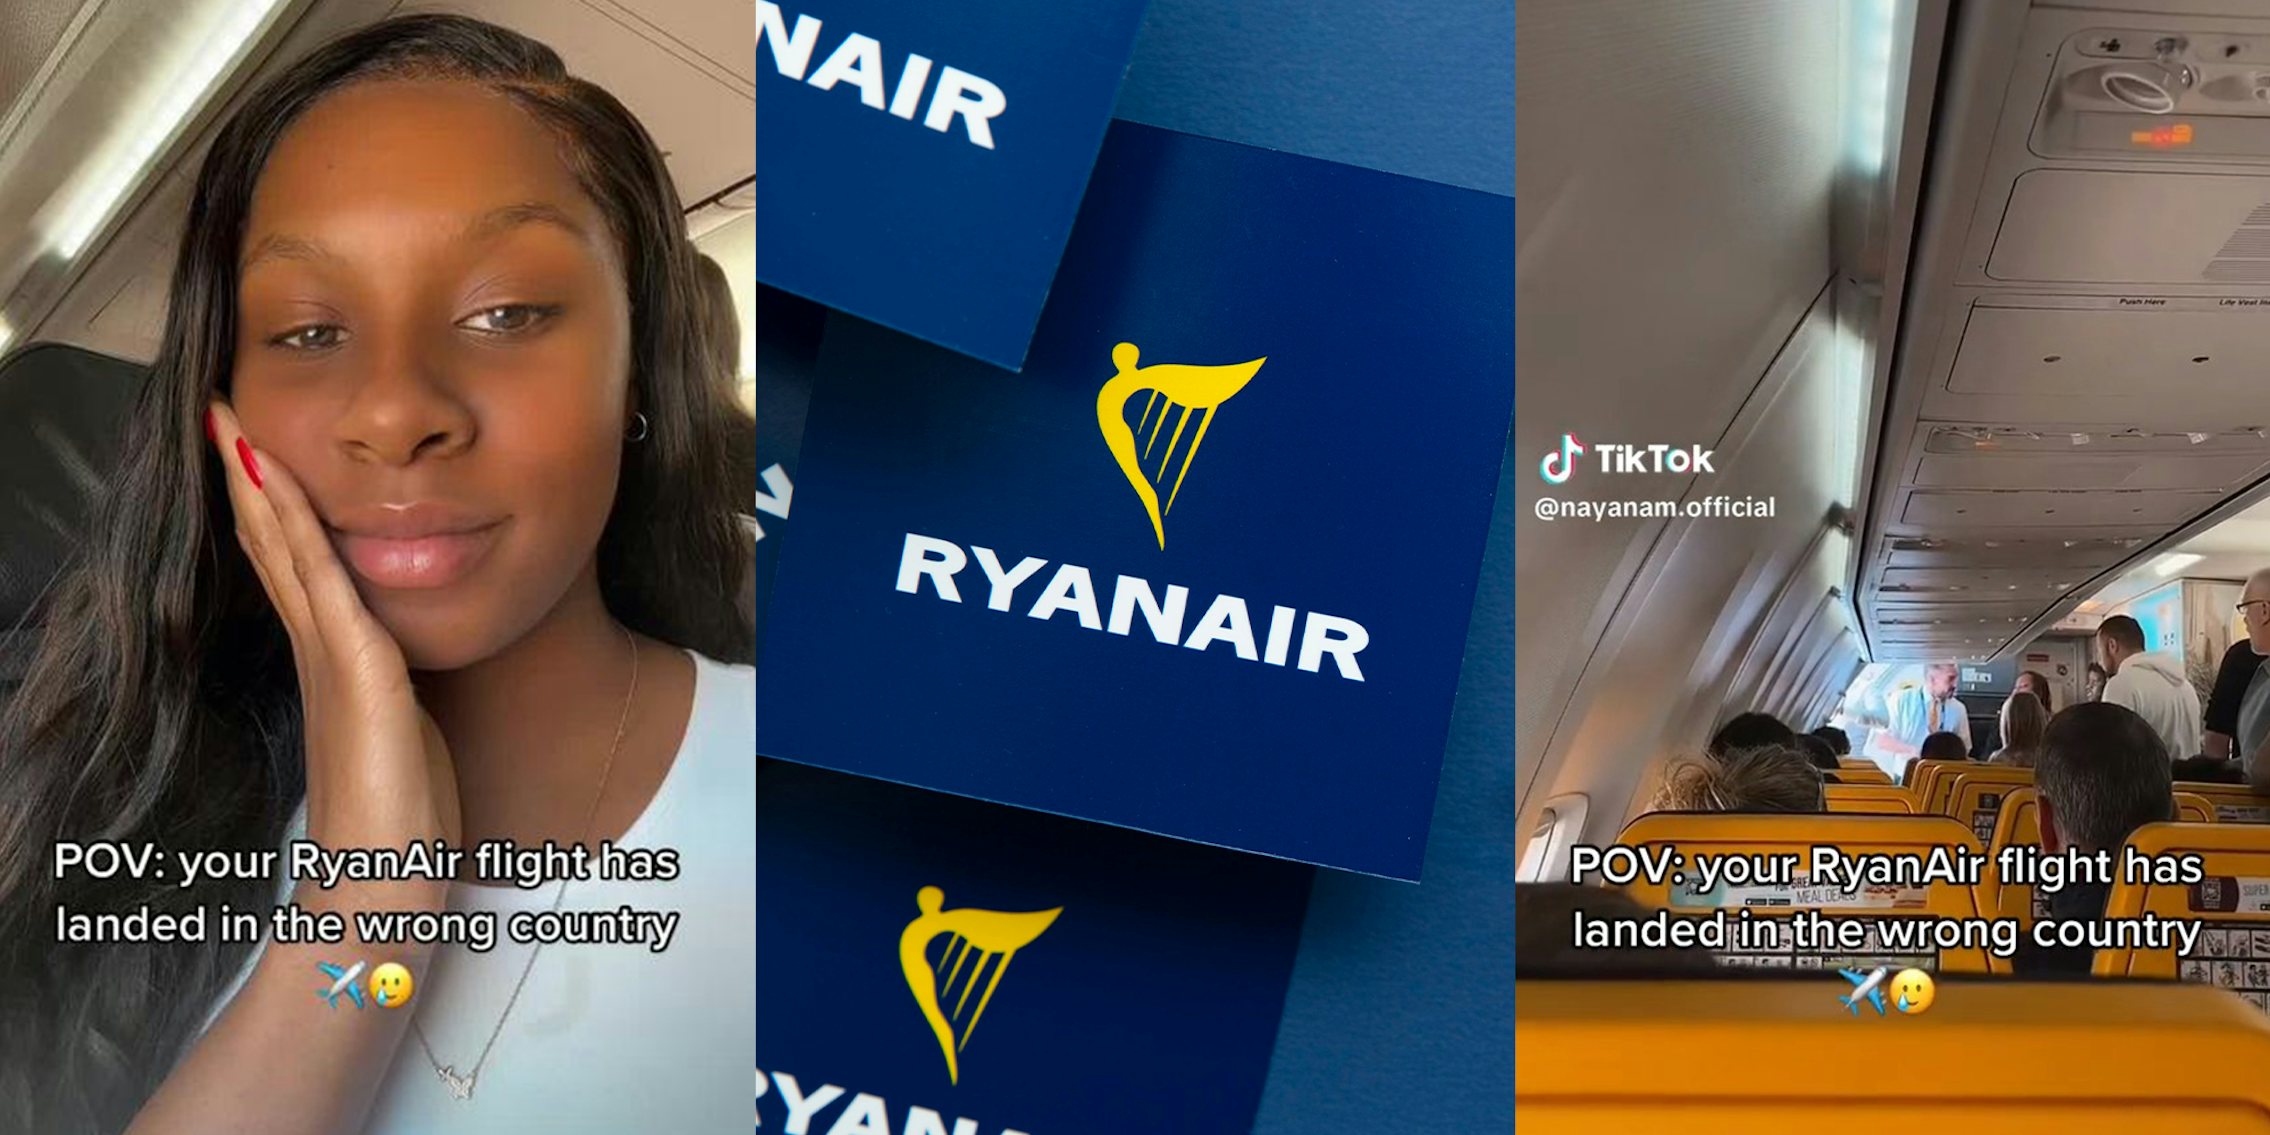 RyanAir passenger says her flight landed in the wrong country